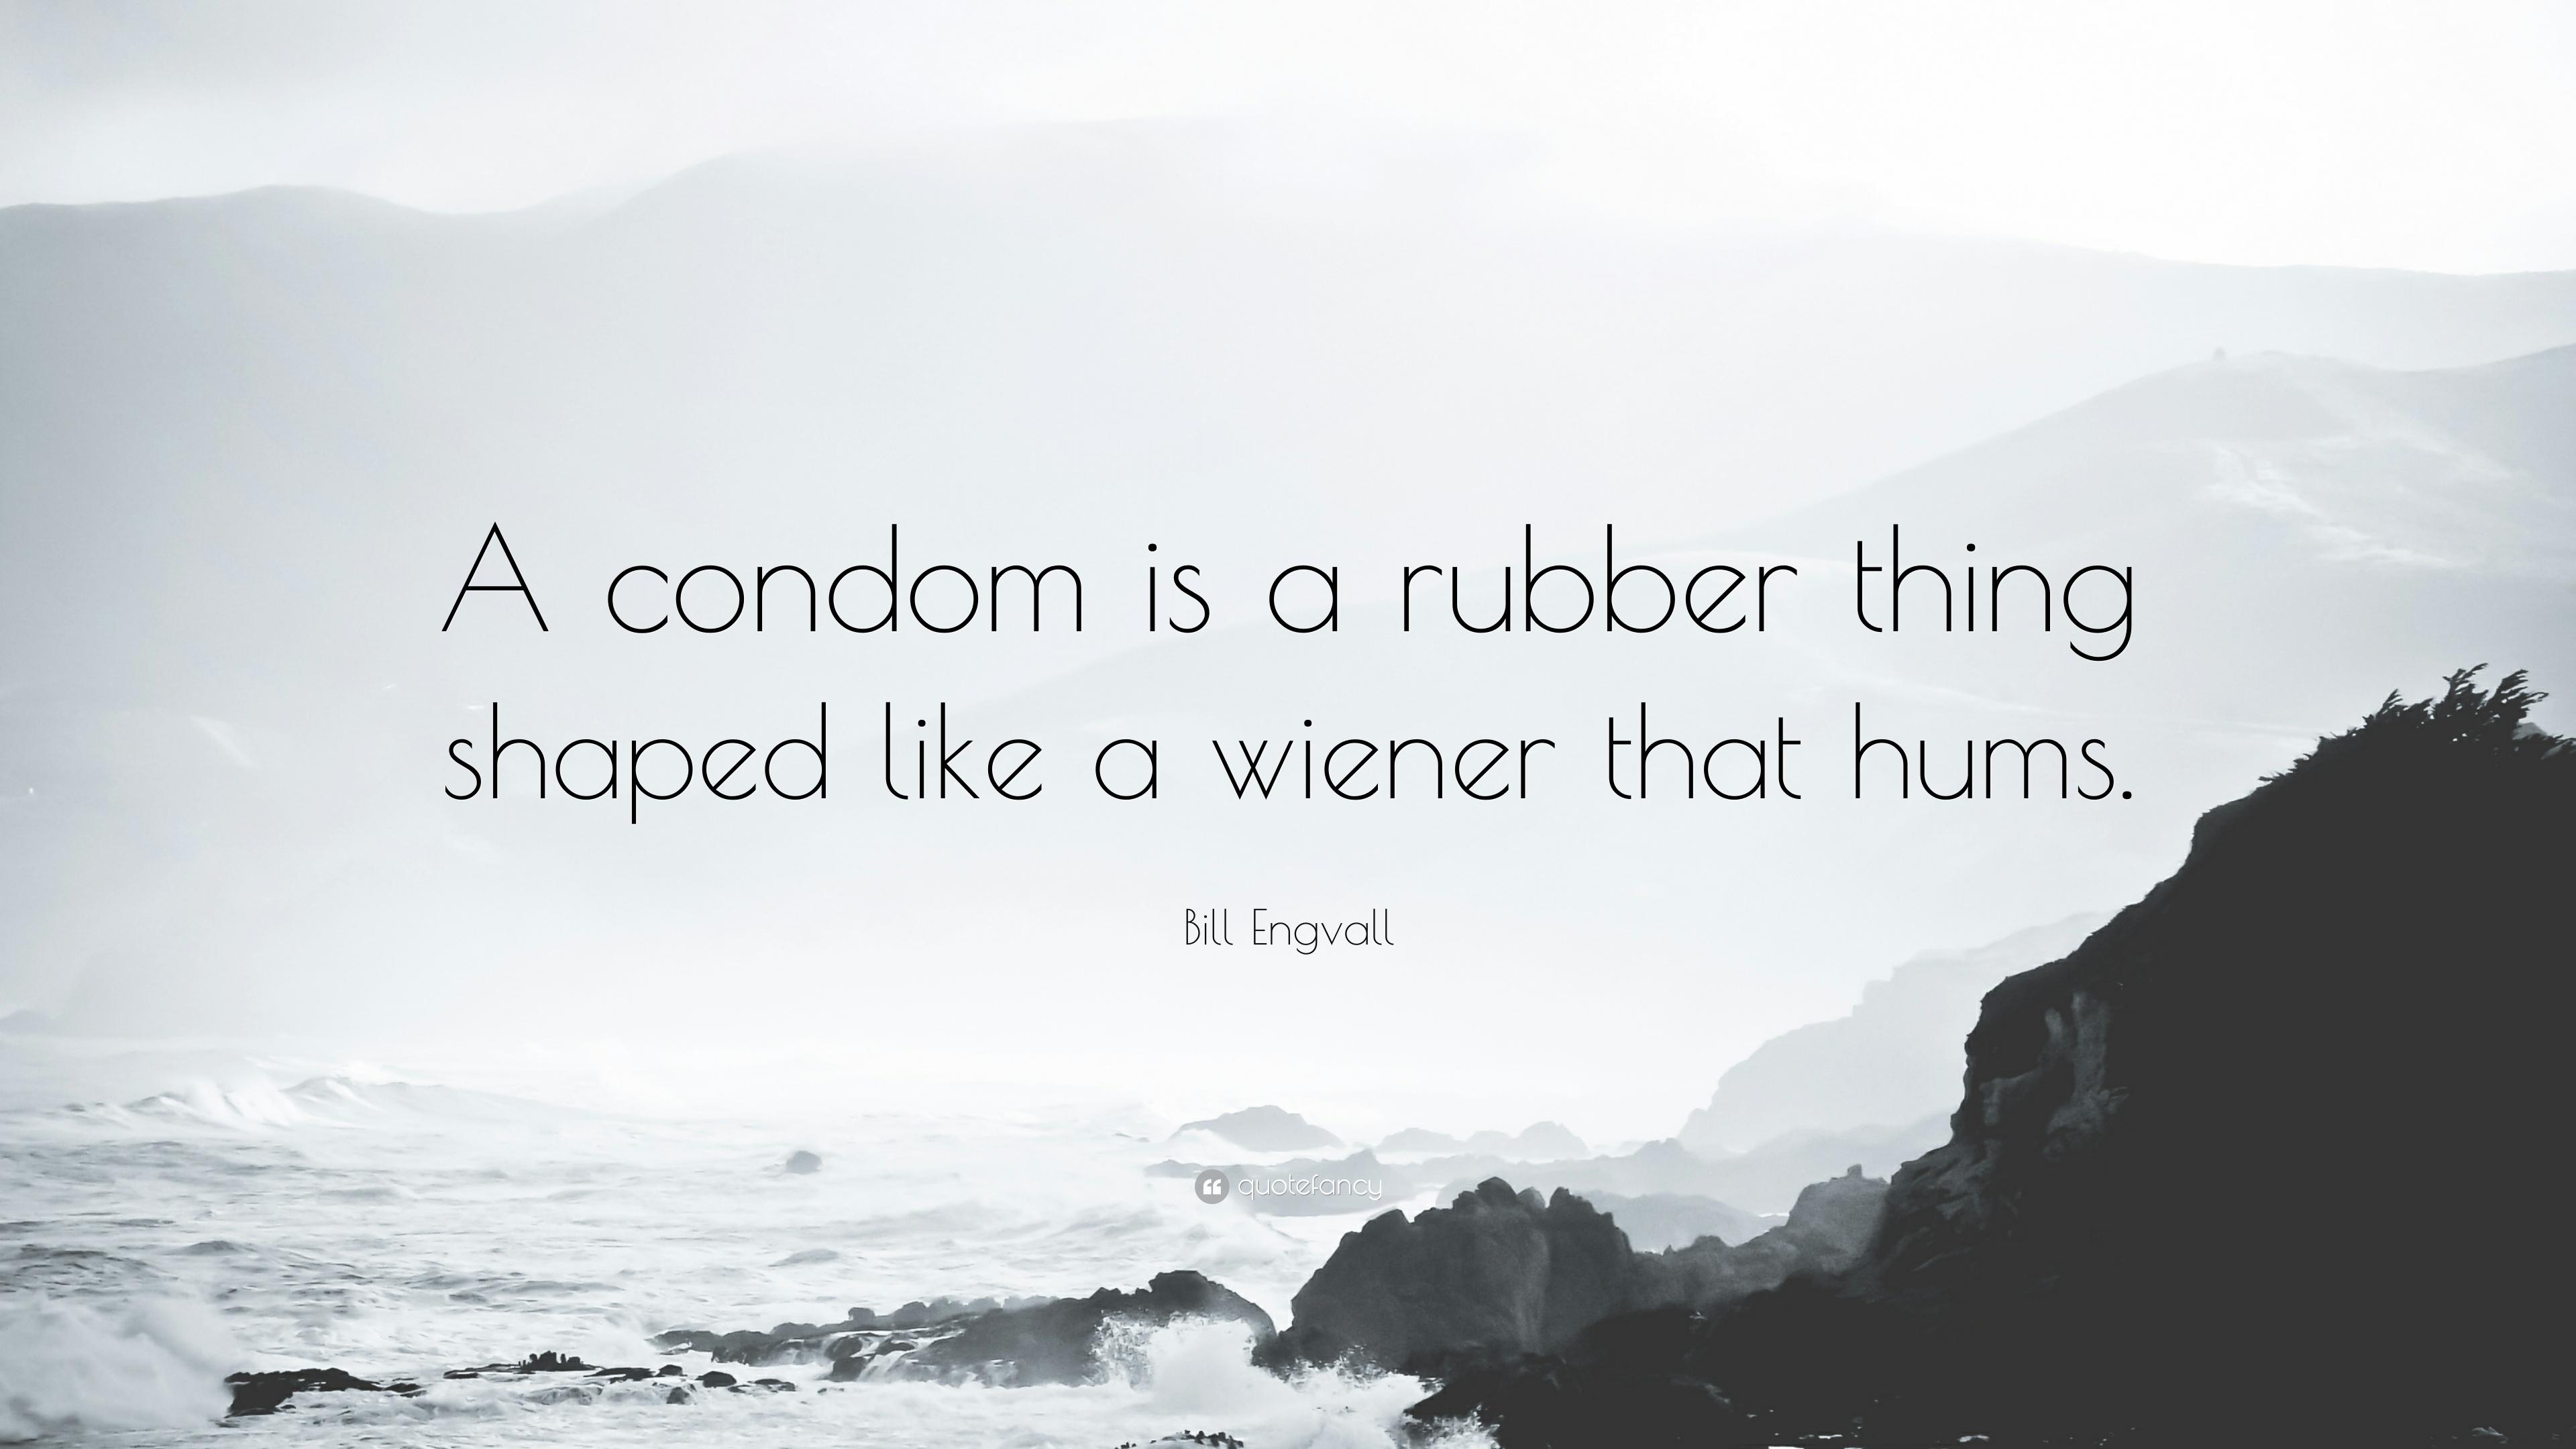 Bill Engvall Quote: “A condom is a rubber thing shaped like a wiener